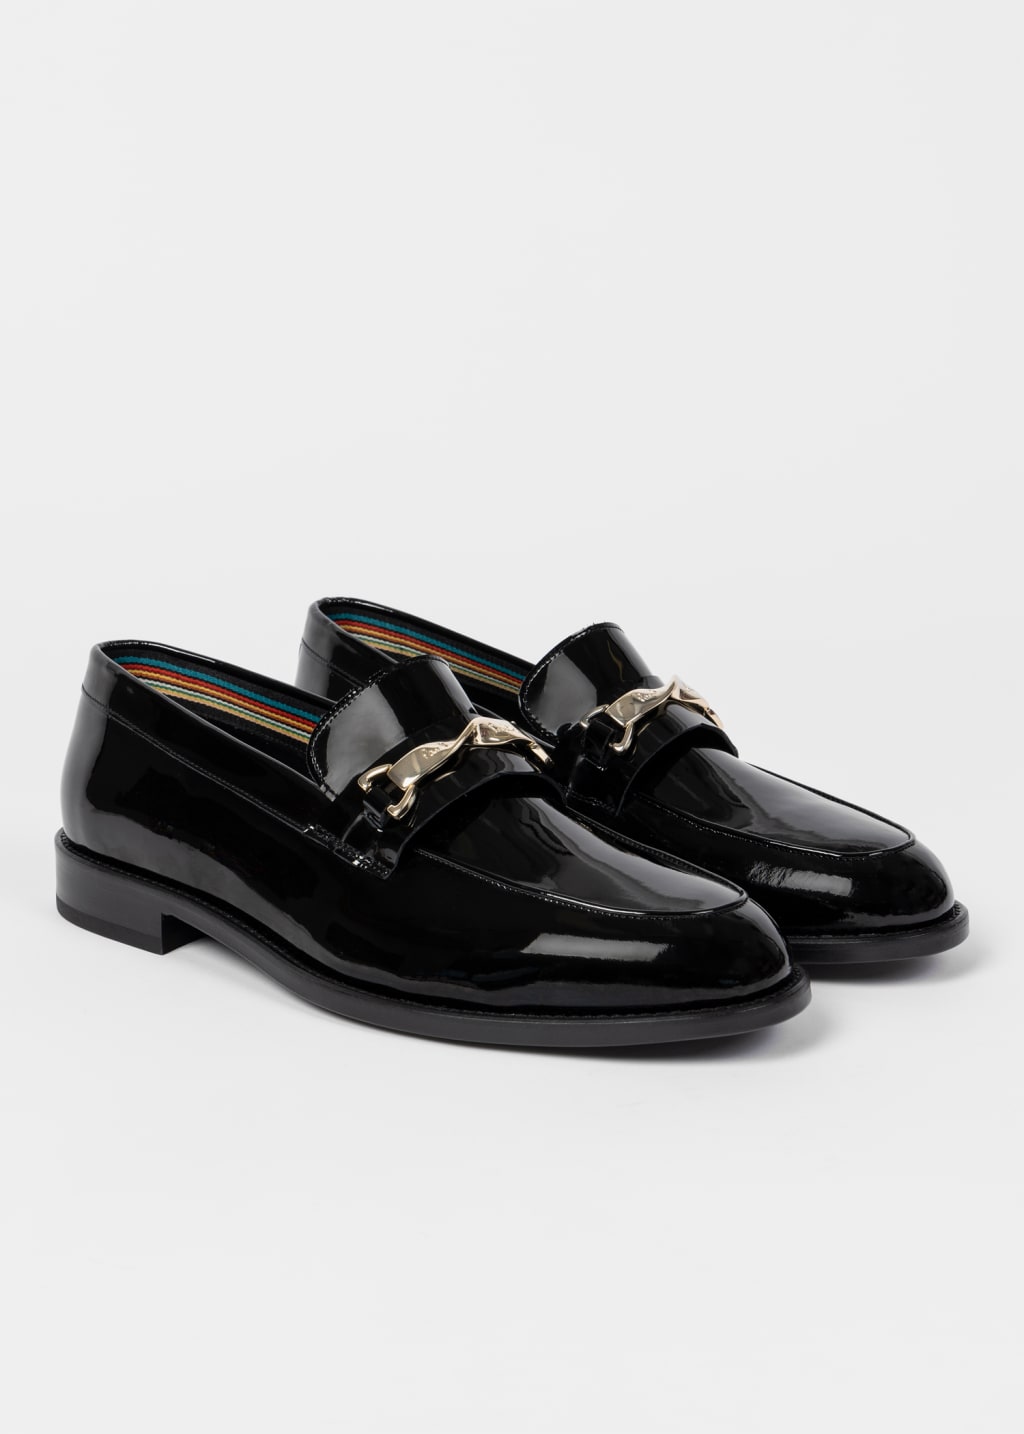 Pair View - Black Patent Leather 'Montego' Loafers Paul Smith